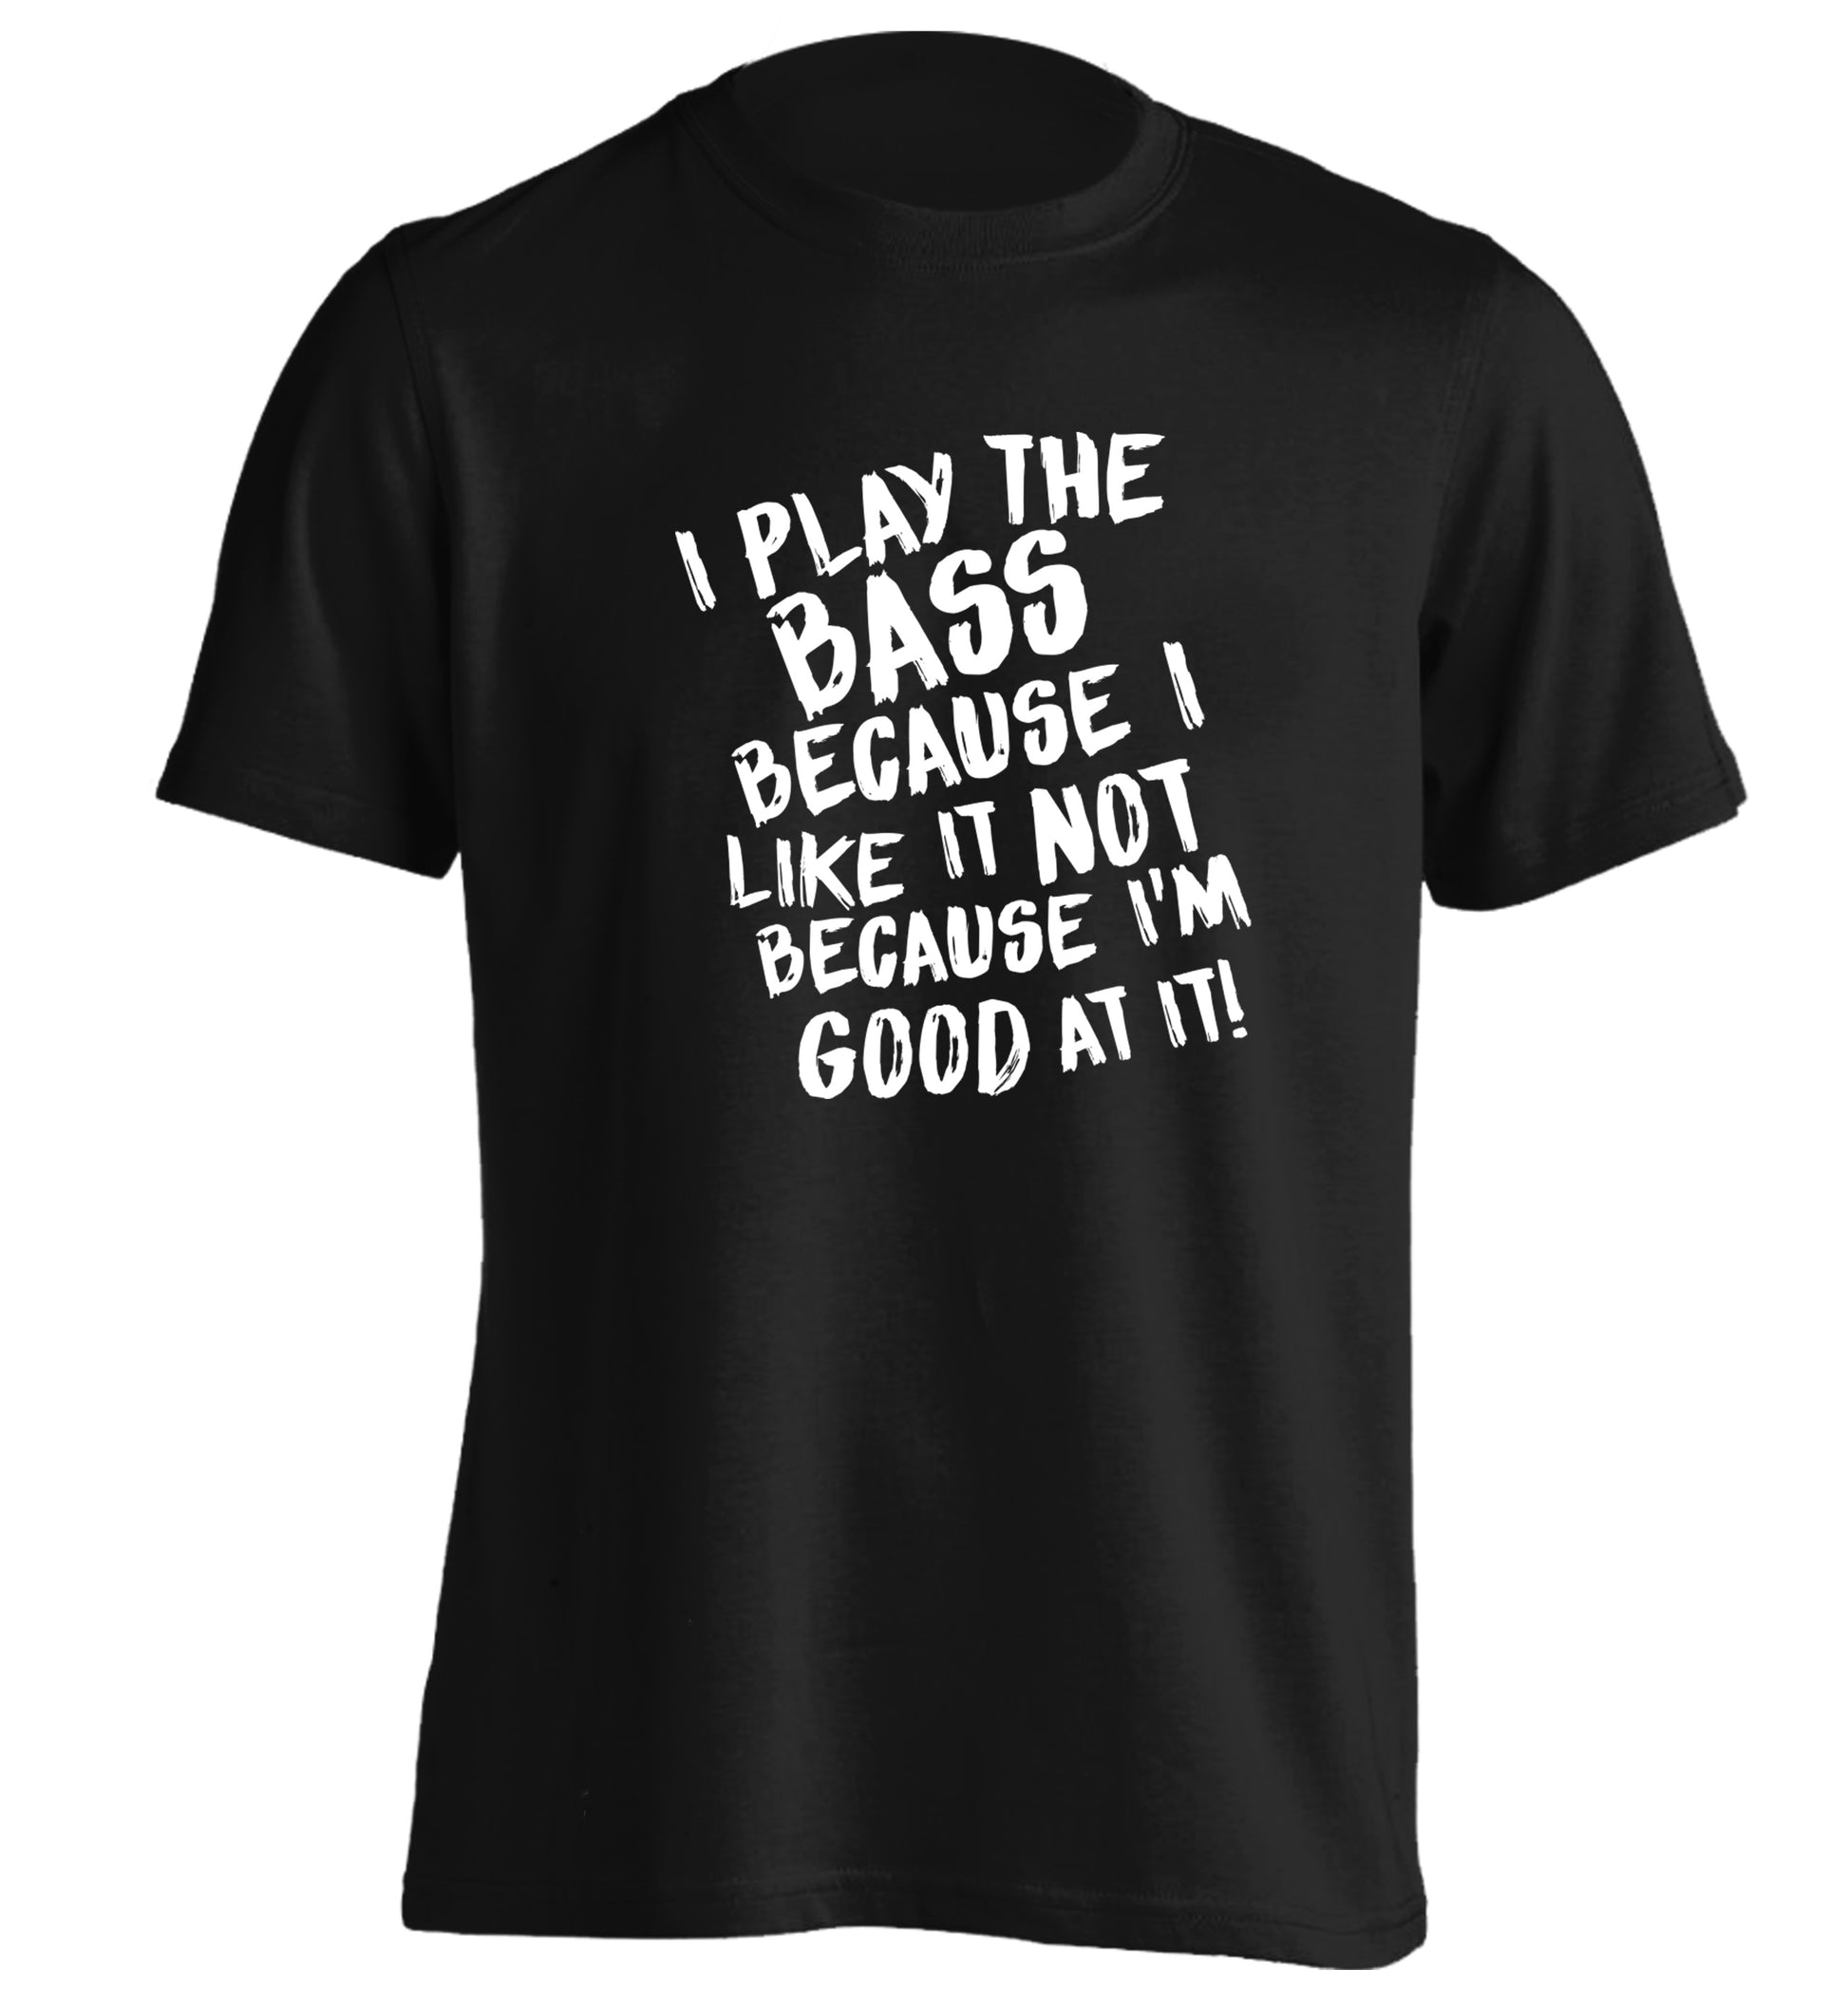 I play the bass because I like it not because I'm good at it adults unisex black Tshirt 2XL